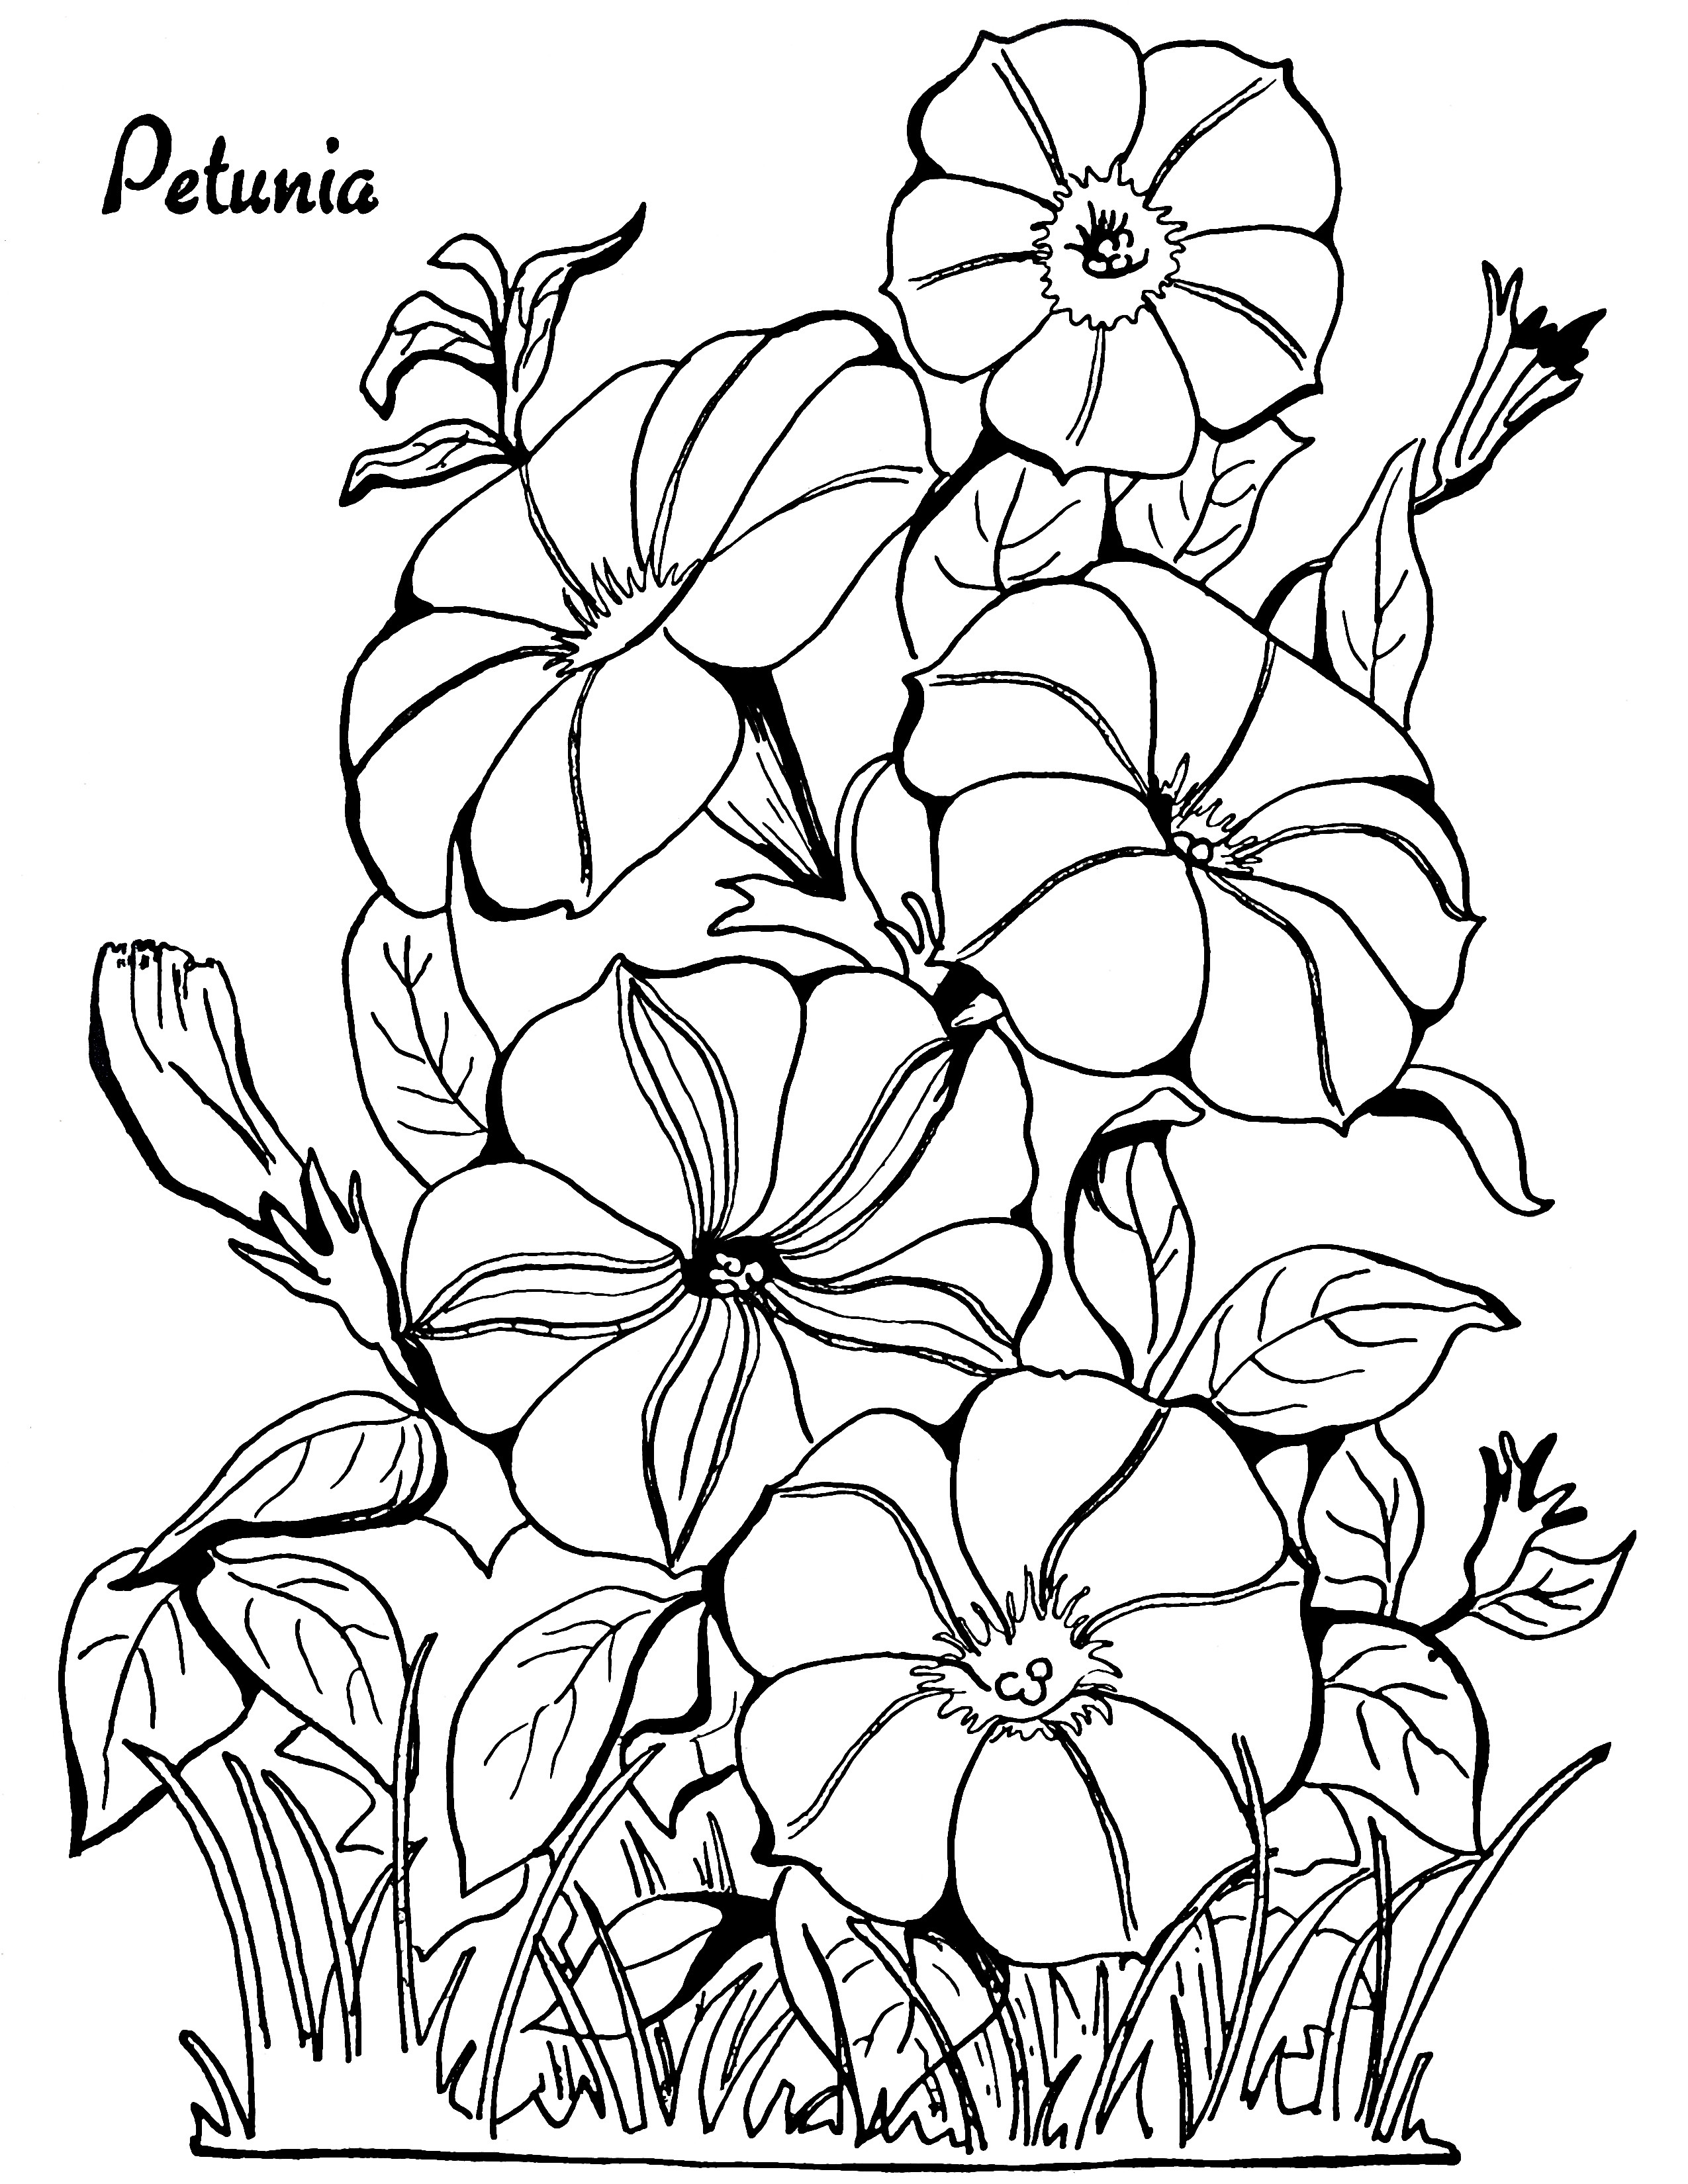 Adult Flower Coloring Pages
 Adult Coloring Page Petunias The Graphics Fairy